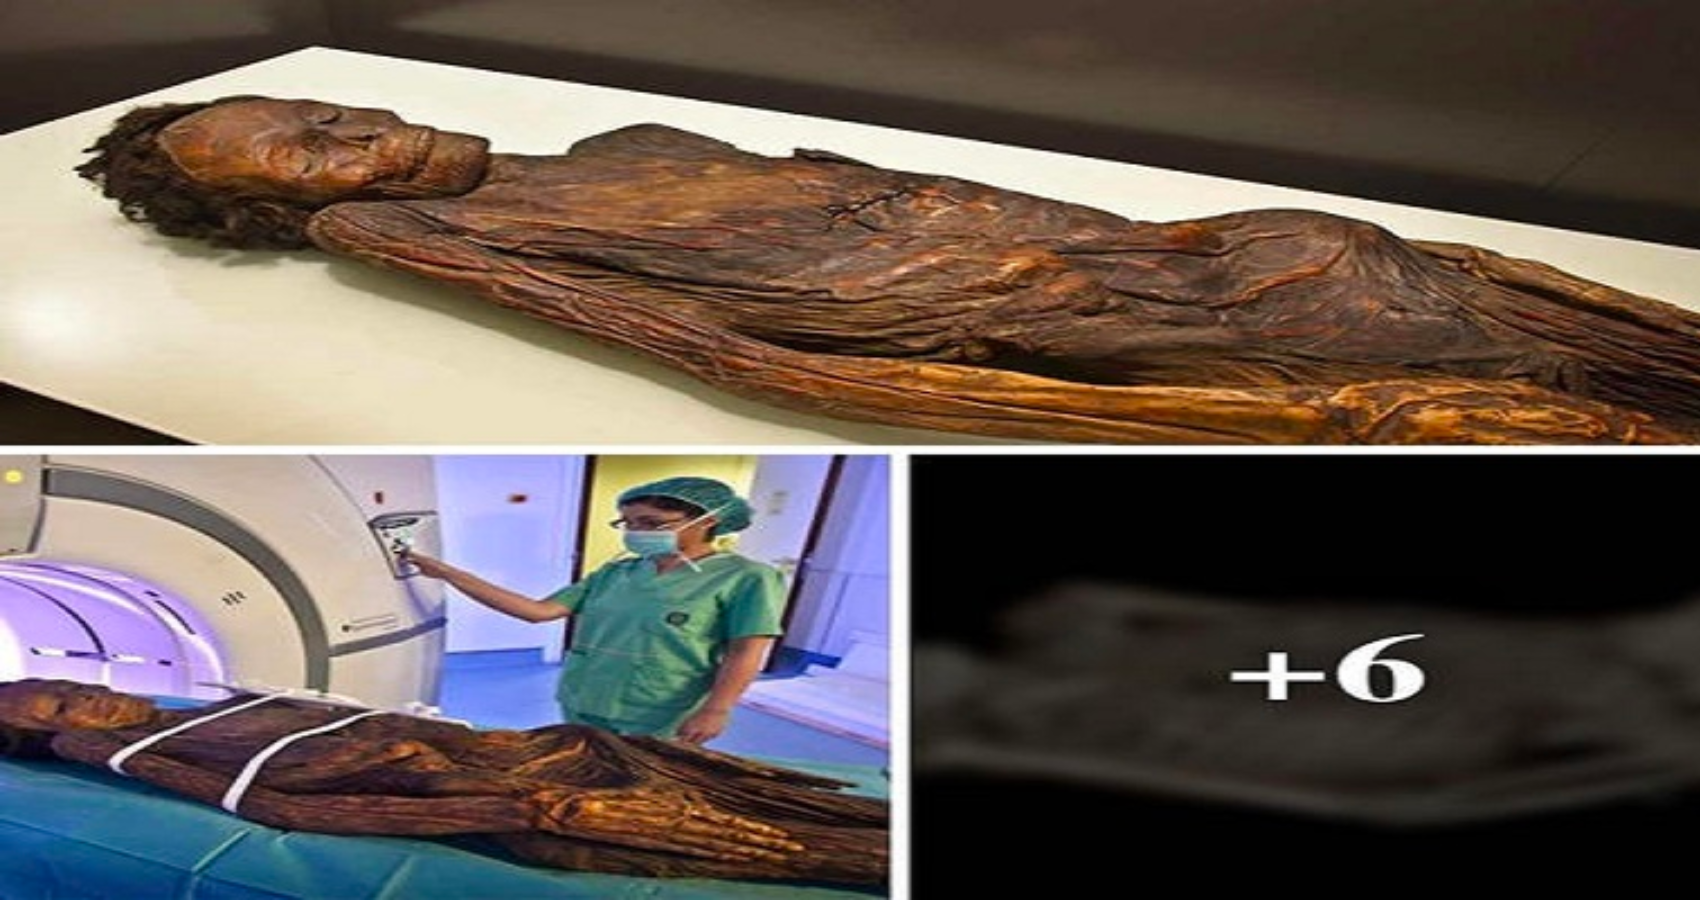 Famous Gaunches Mummies Drenched In Dragons’ Blood Like A Stradivarius Violin